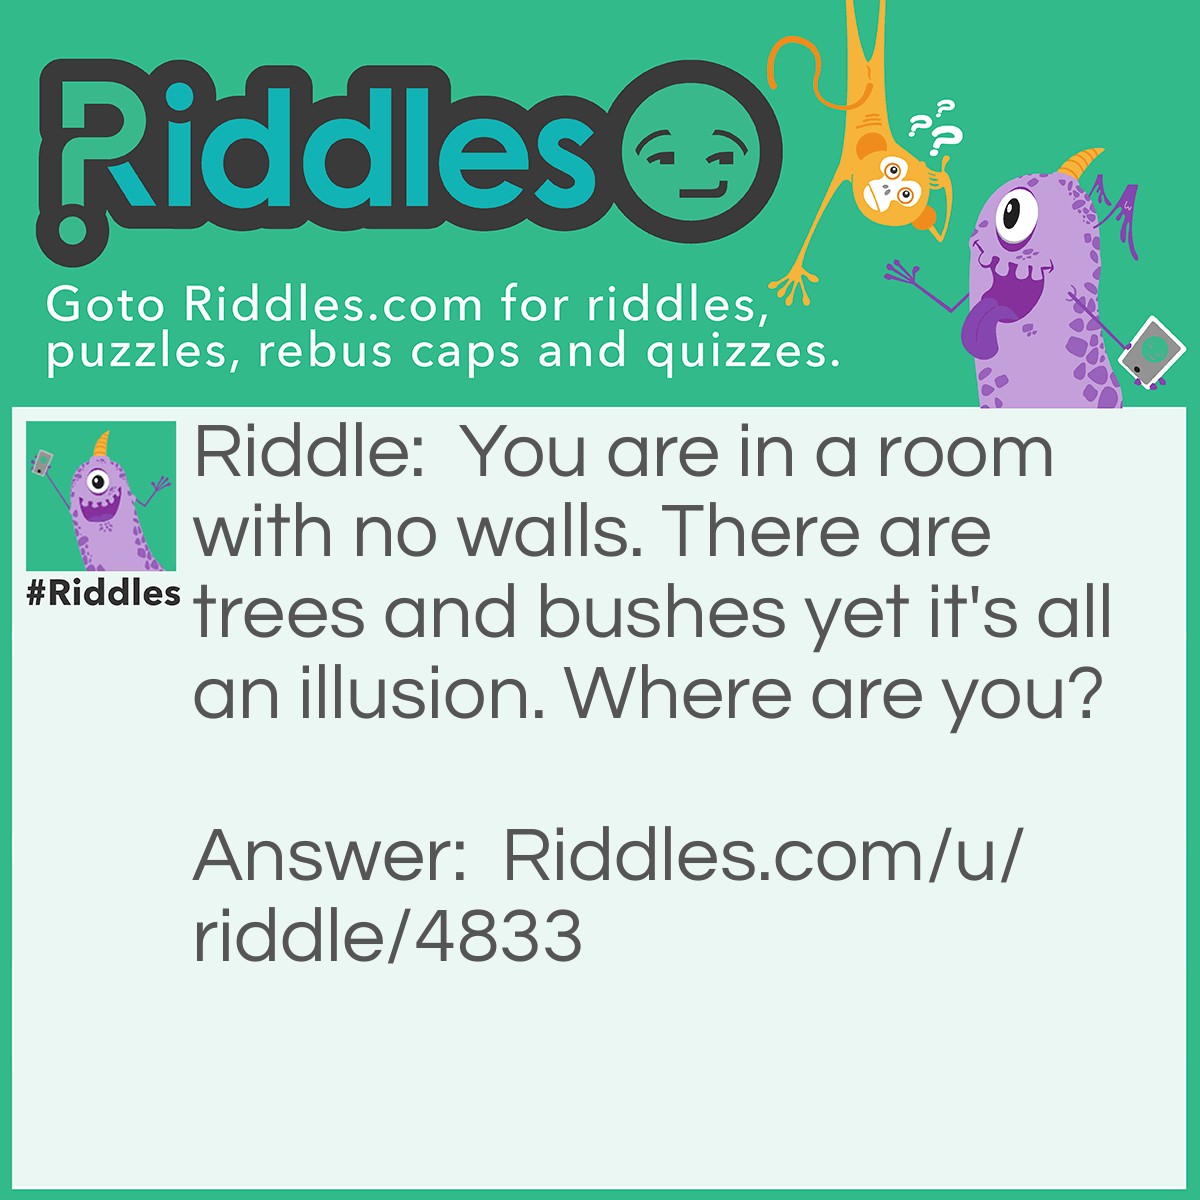 Riddle: You are in a room with no walls. There are trees and bushes yet it's all an illusion. Where are you? Answer: You are dead. There are no walls in the room of heaven, and there aren't really trees and bushes there ((that I know of)) My friend made this riddle so all credit goes to her!